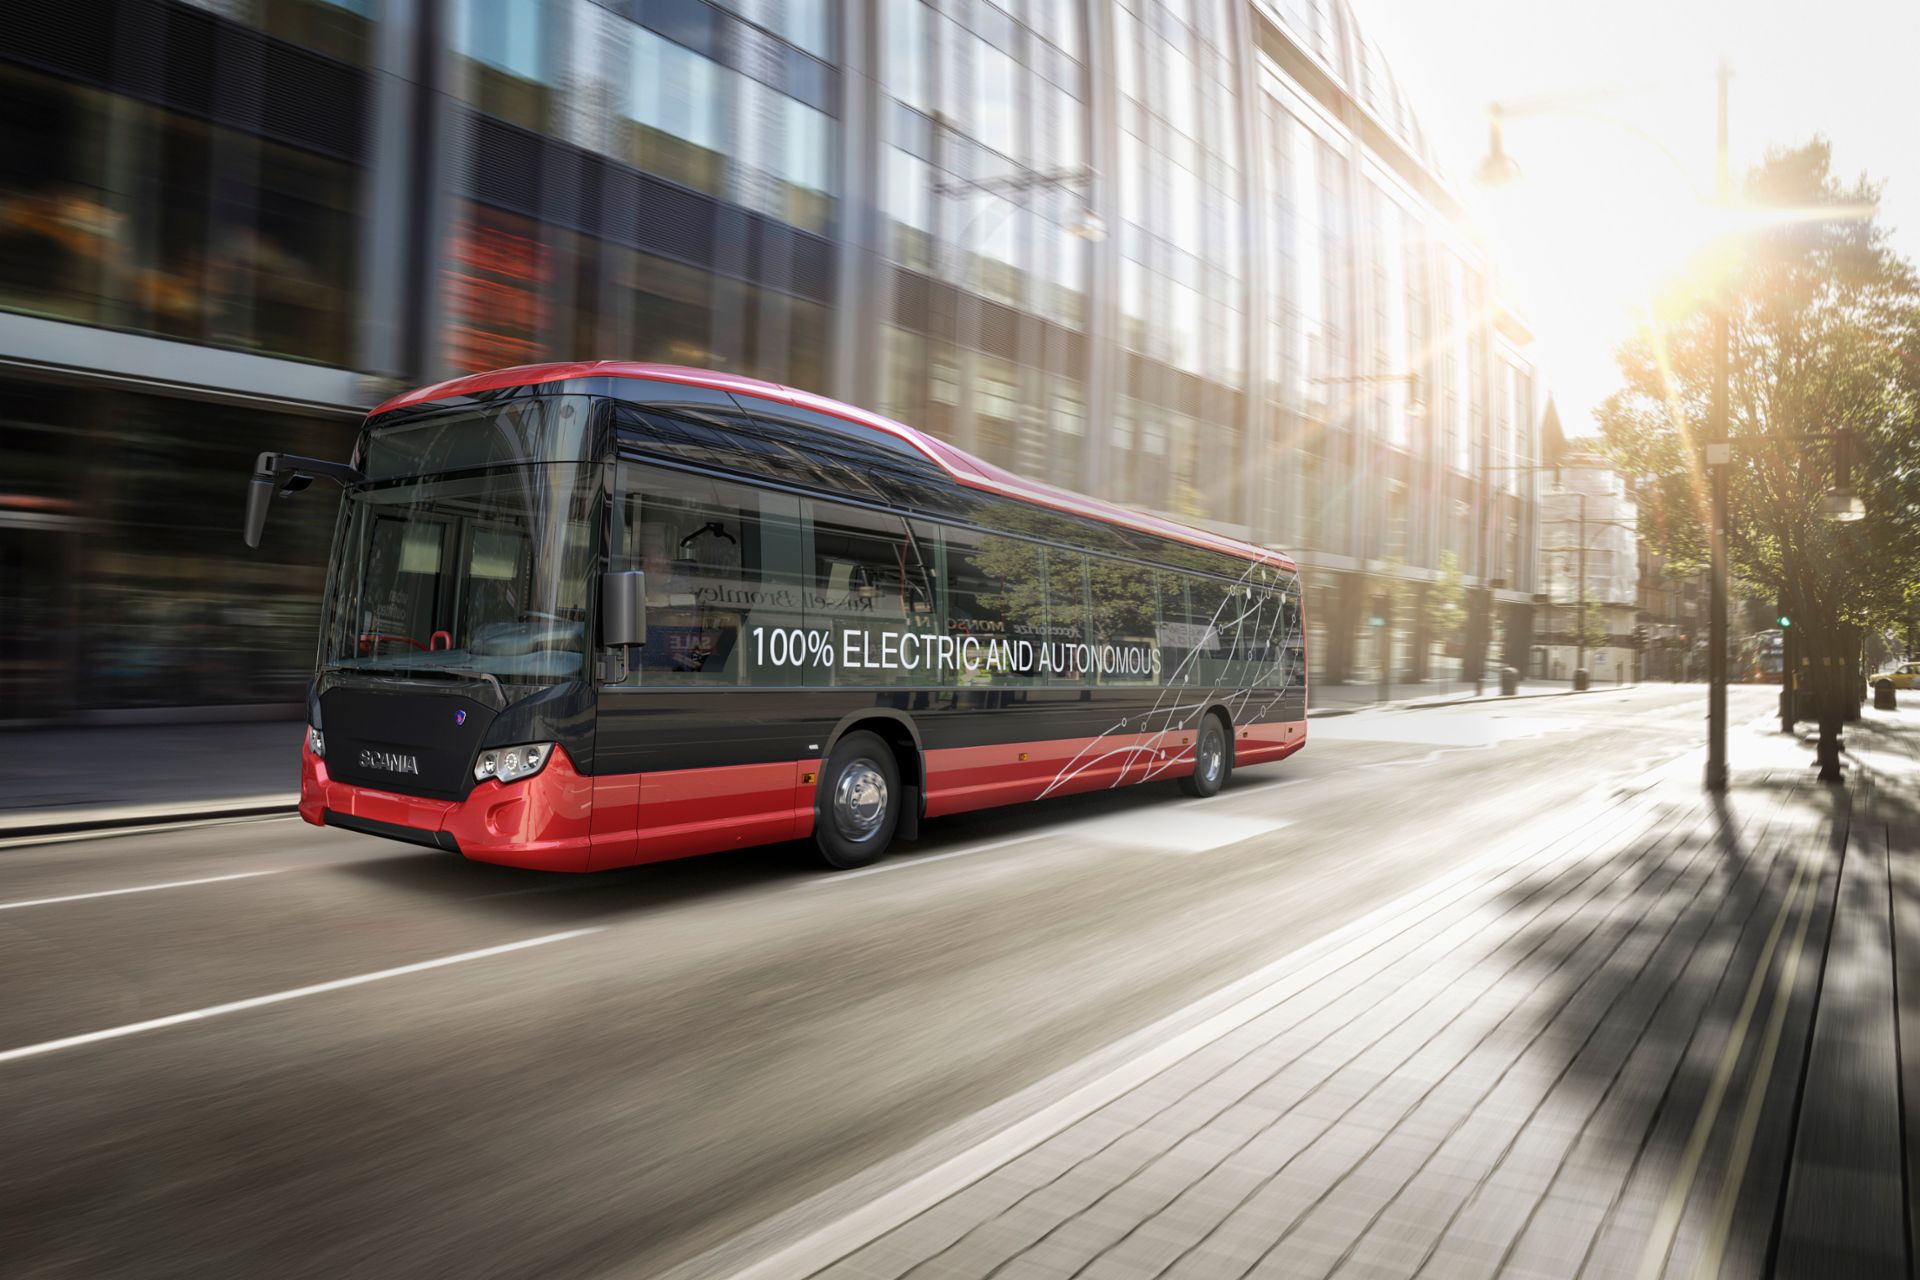 Scania will cooperate with Nobina to test autonomous buses.